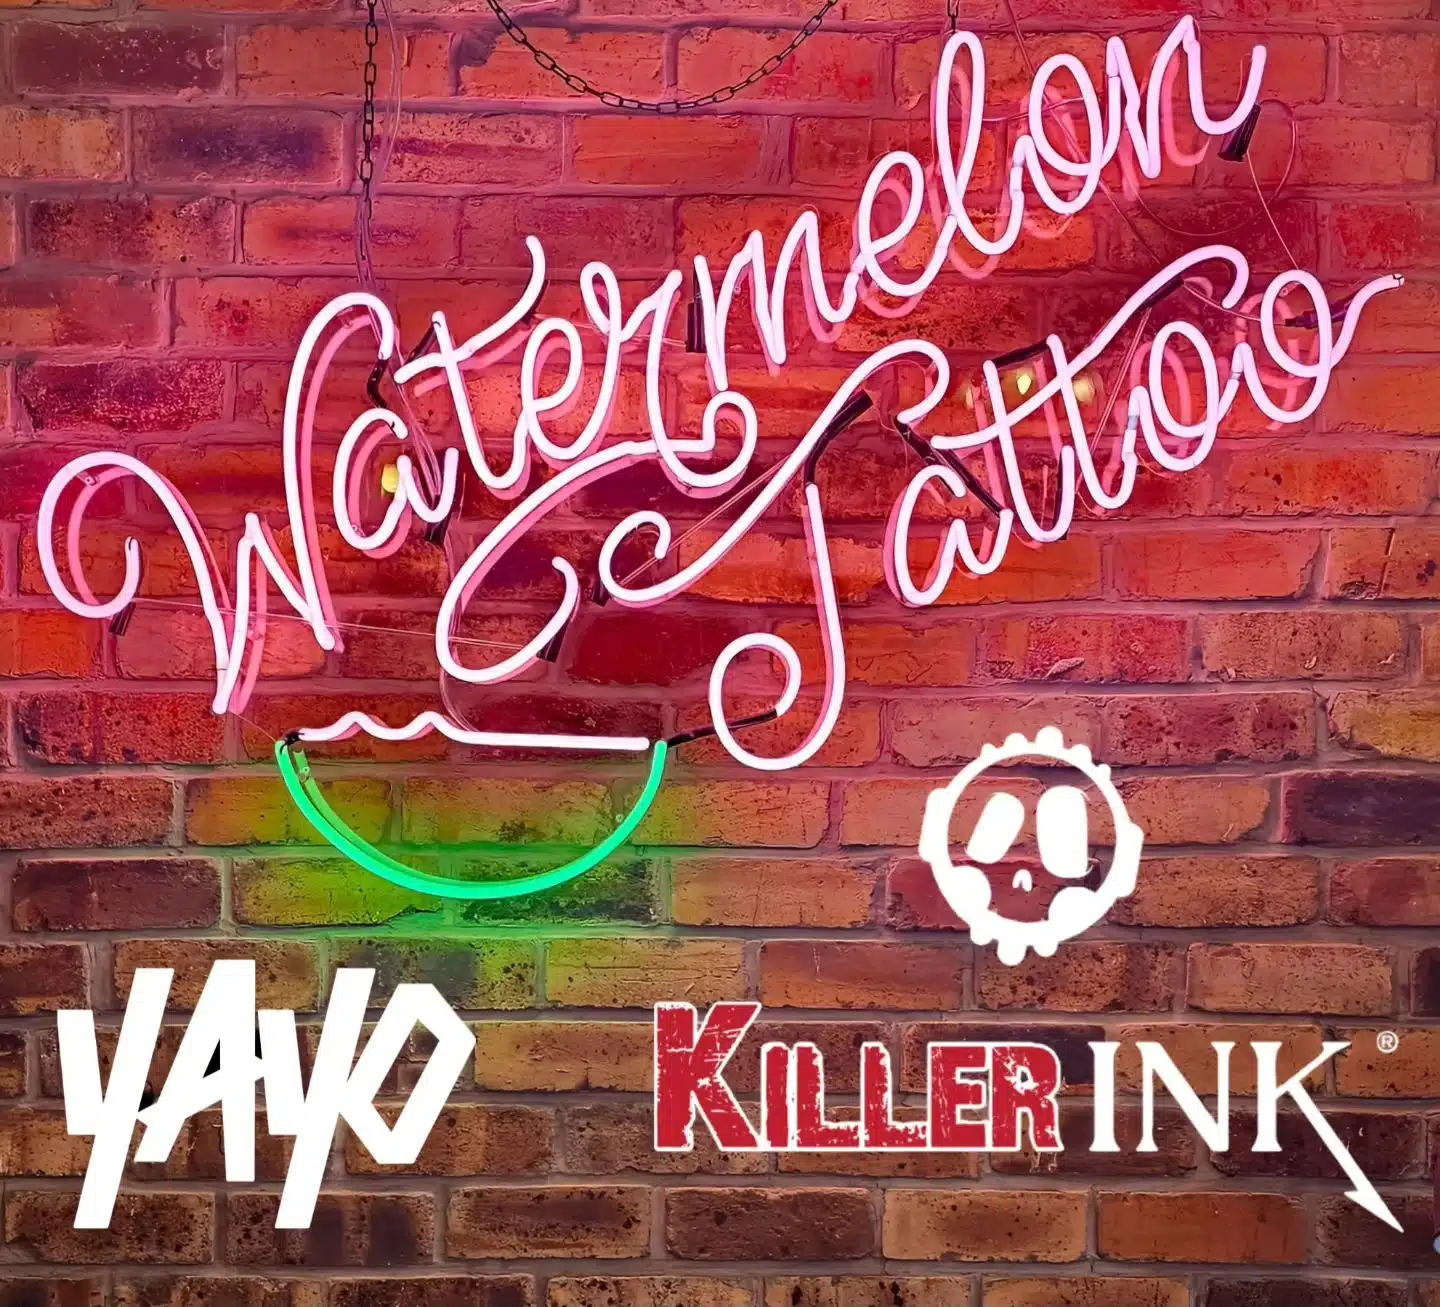 So chuffed to be working in collaboration with killerinktattoo and yayofamilia ! 

 